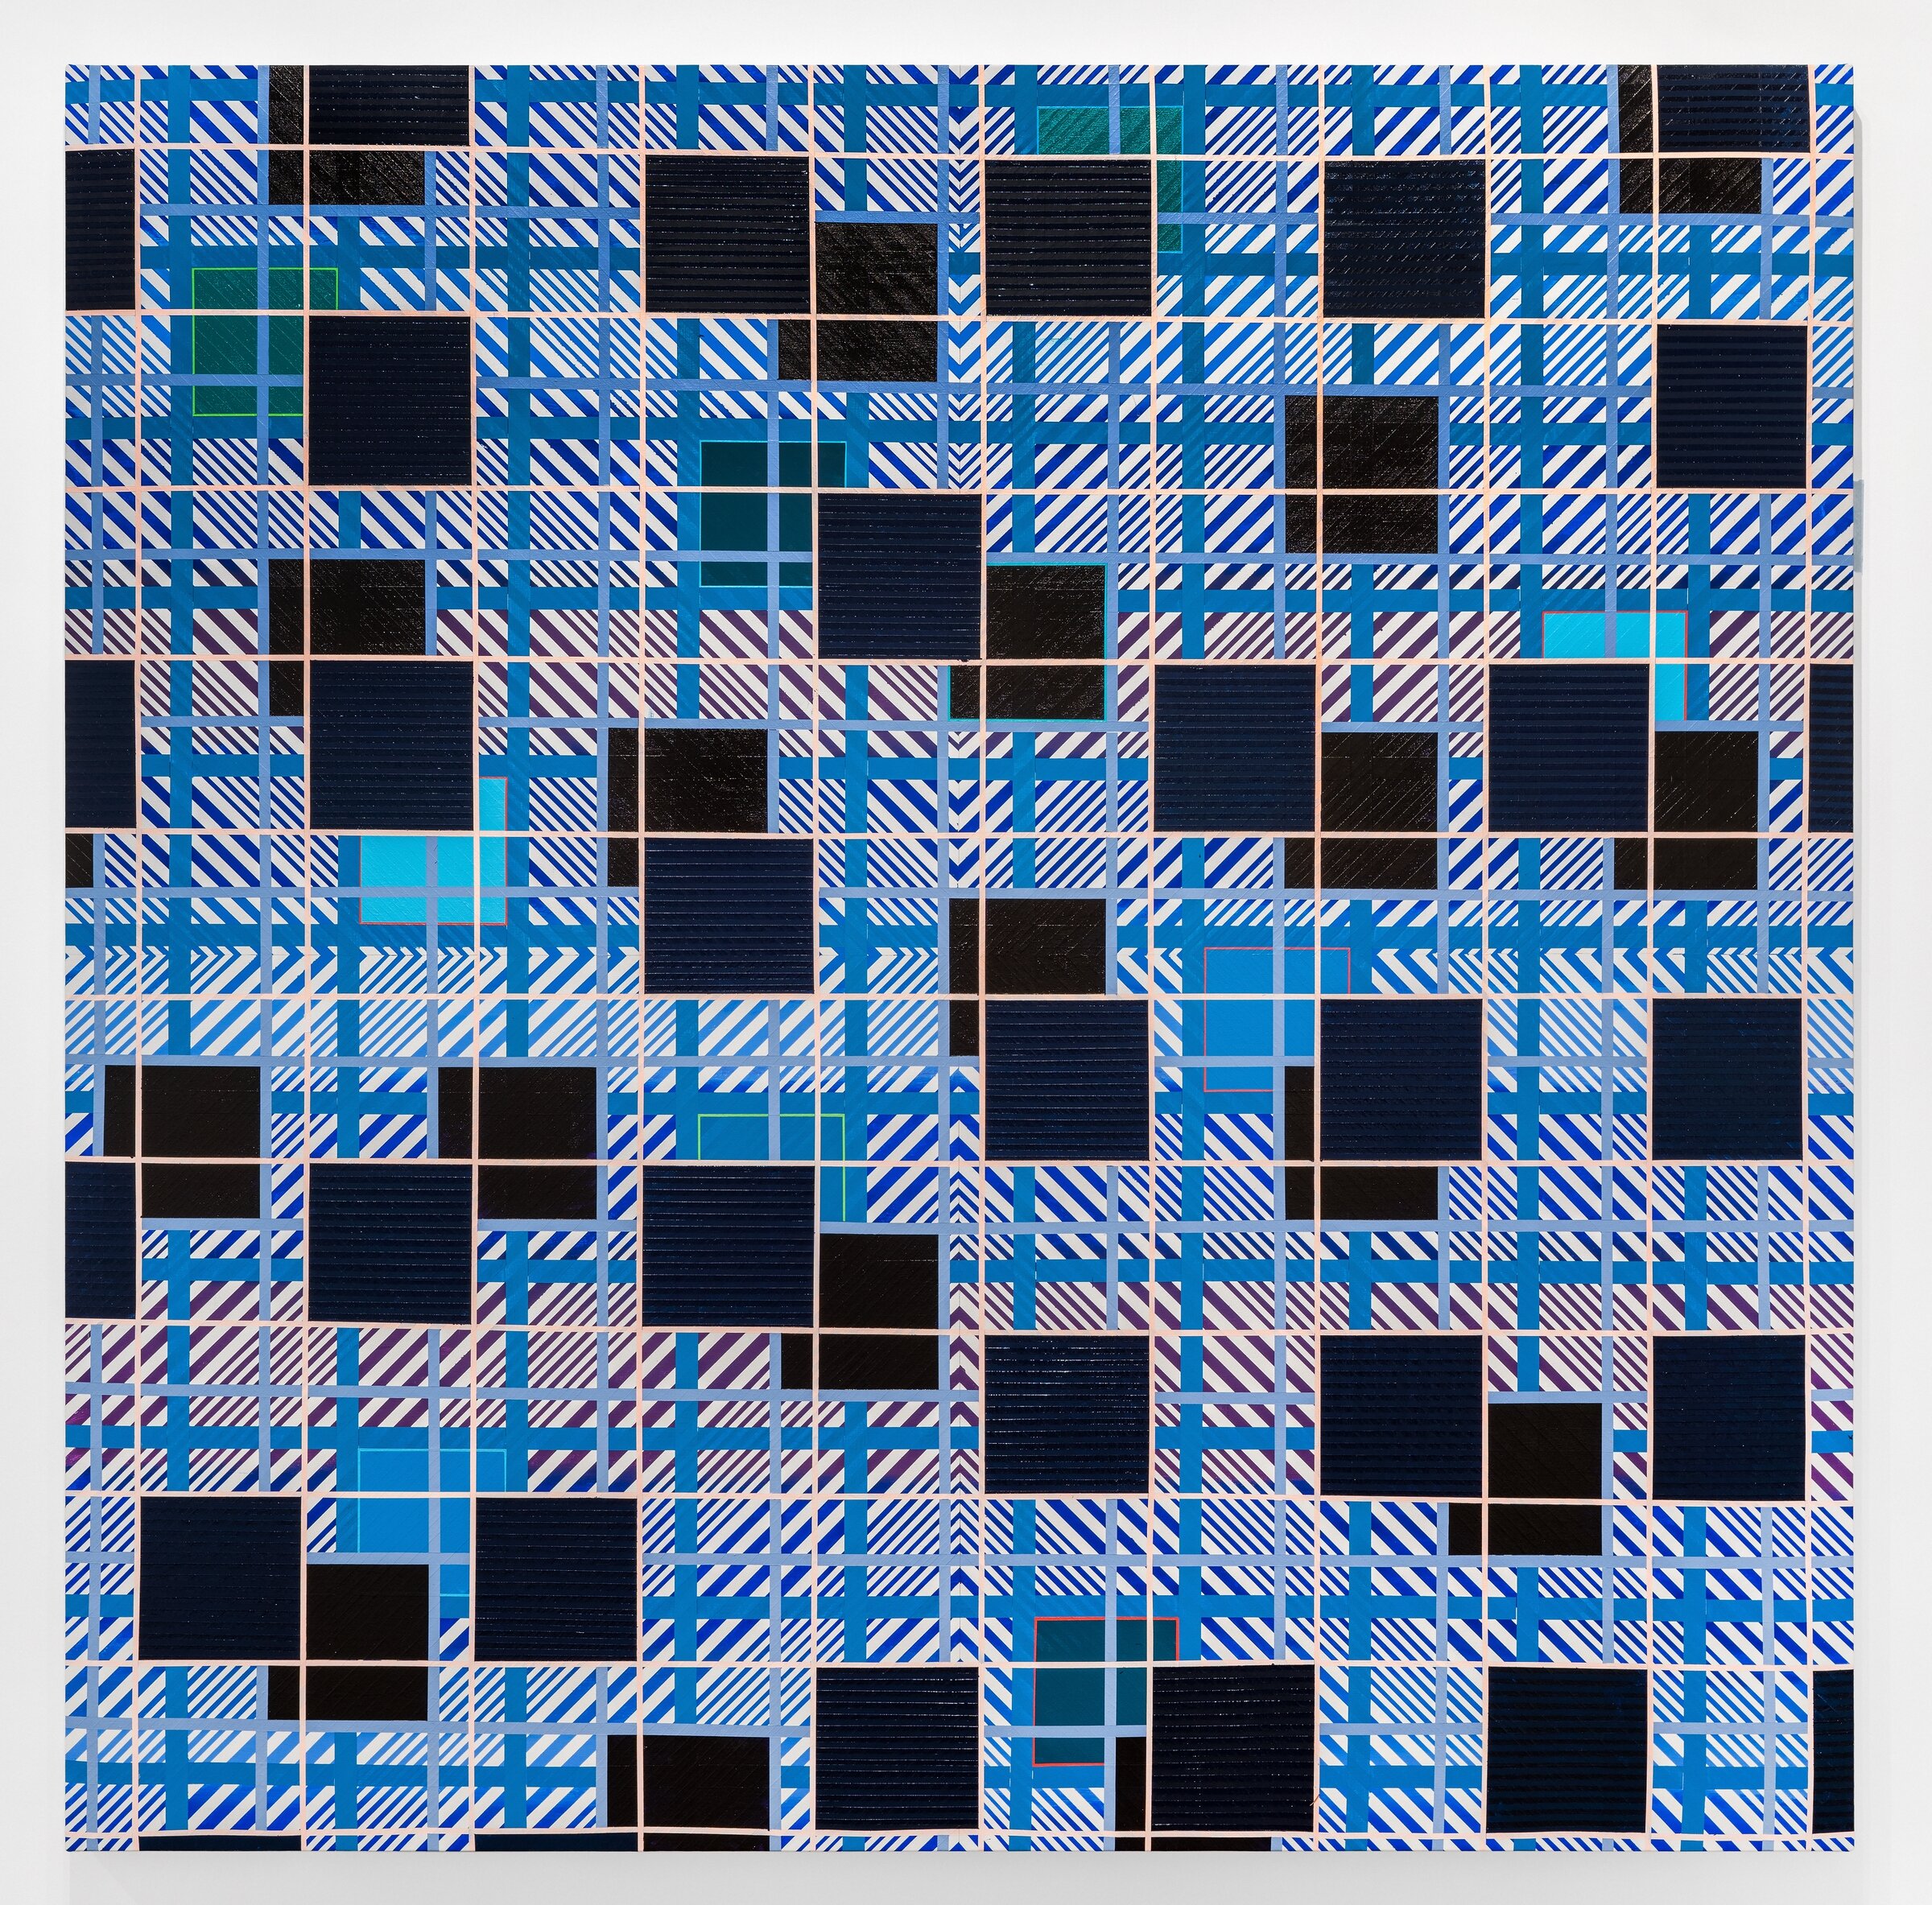   Kelley Johnson   Untitled , 2020 Acrylic and flashe on canvas 74 x 74 inches 